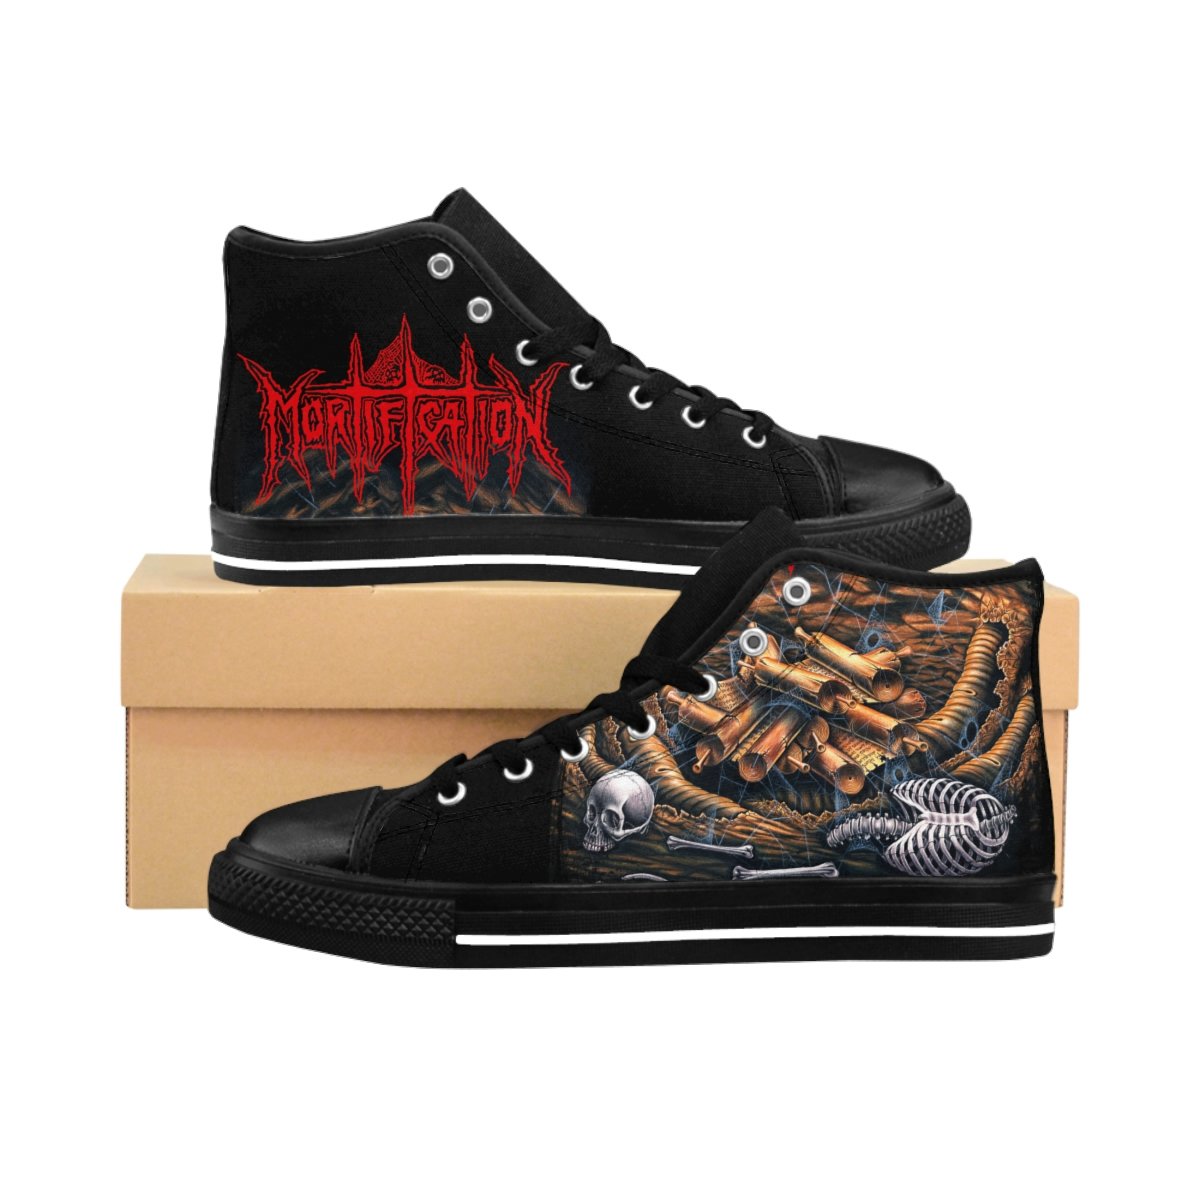 Mortification – Scrolls of the Megilloth Men’s High-top Sneakers